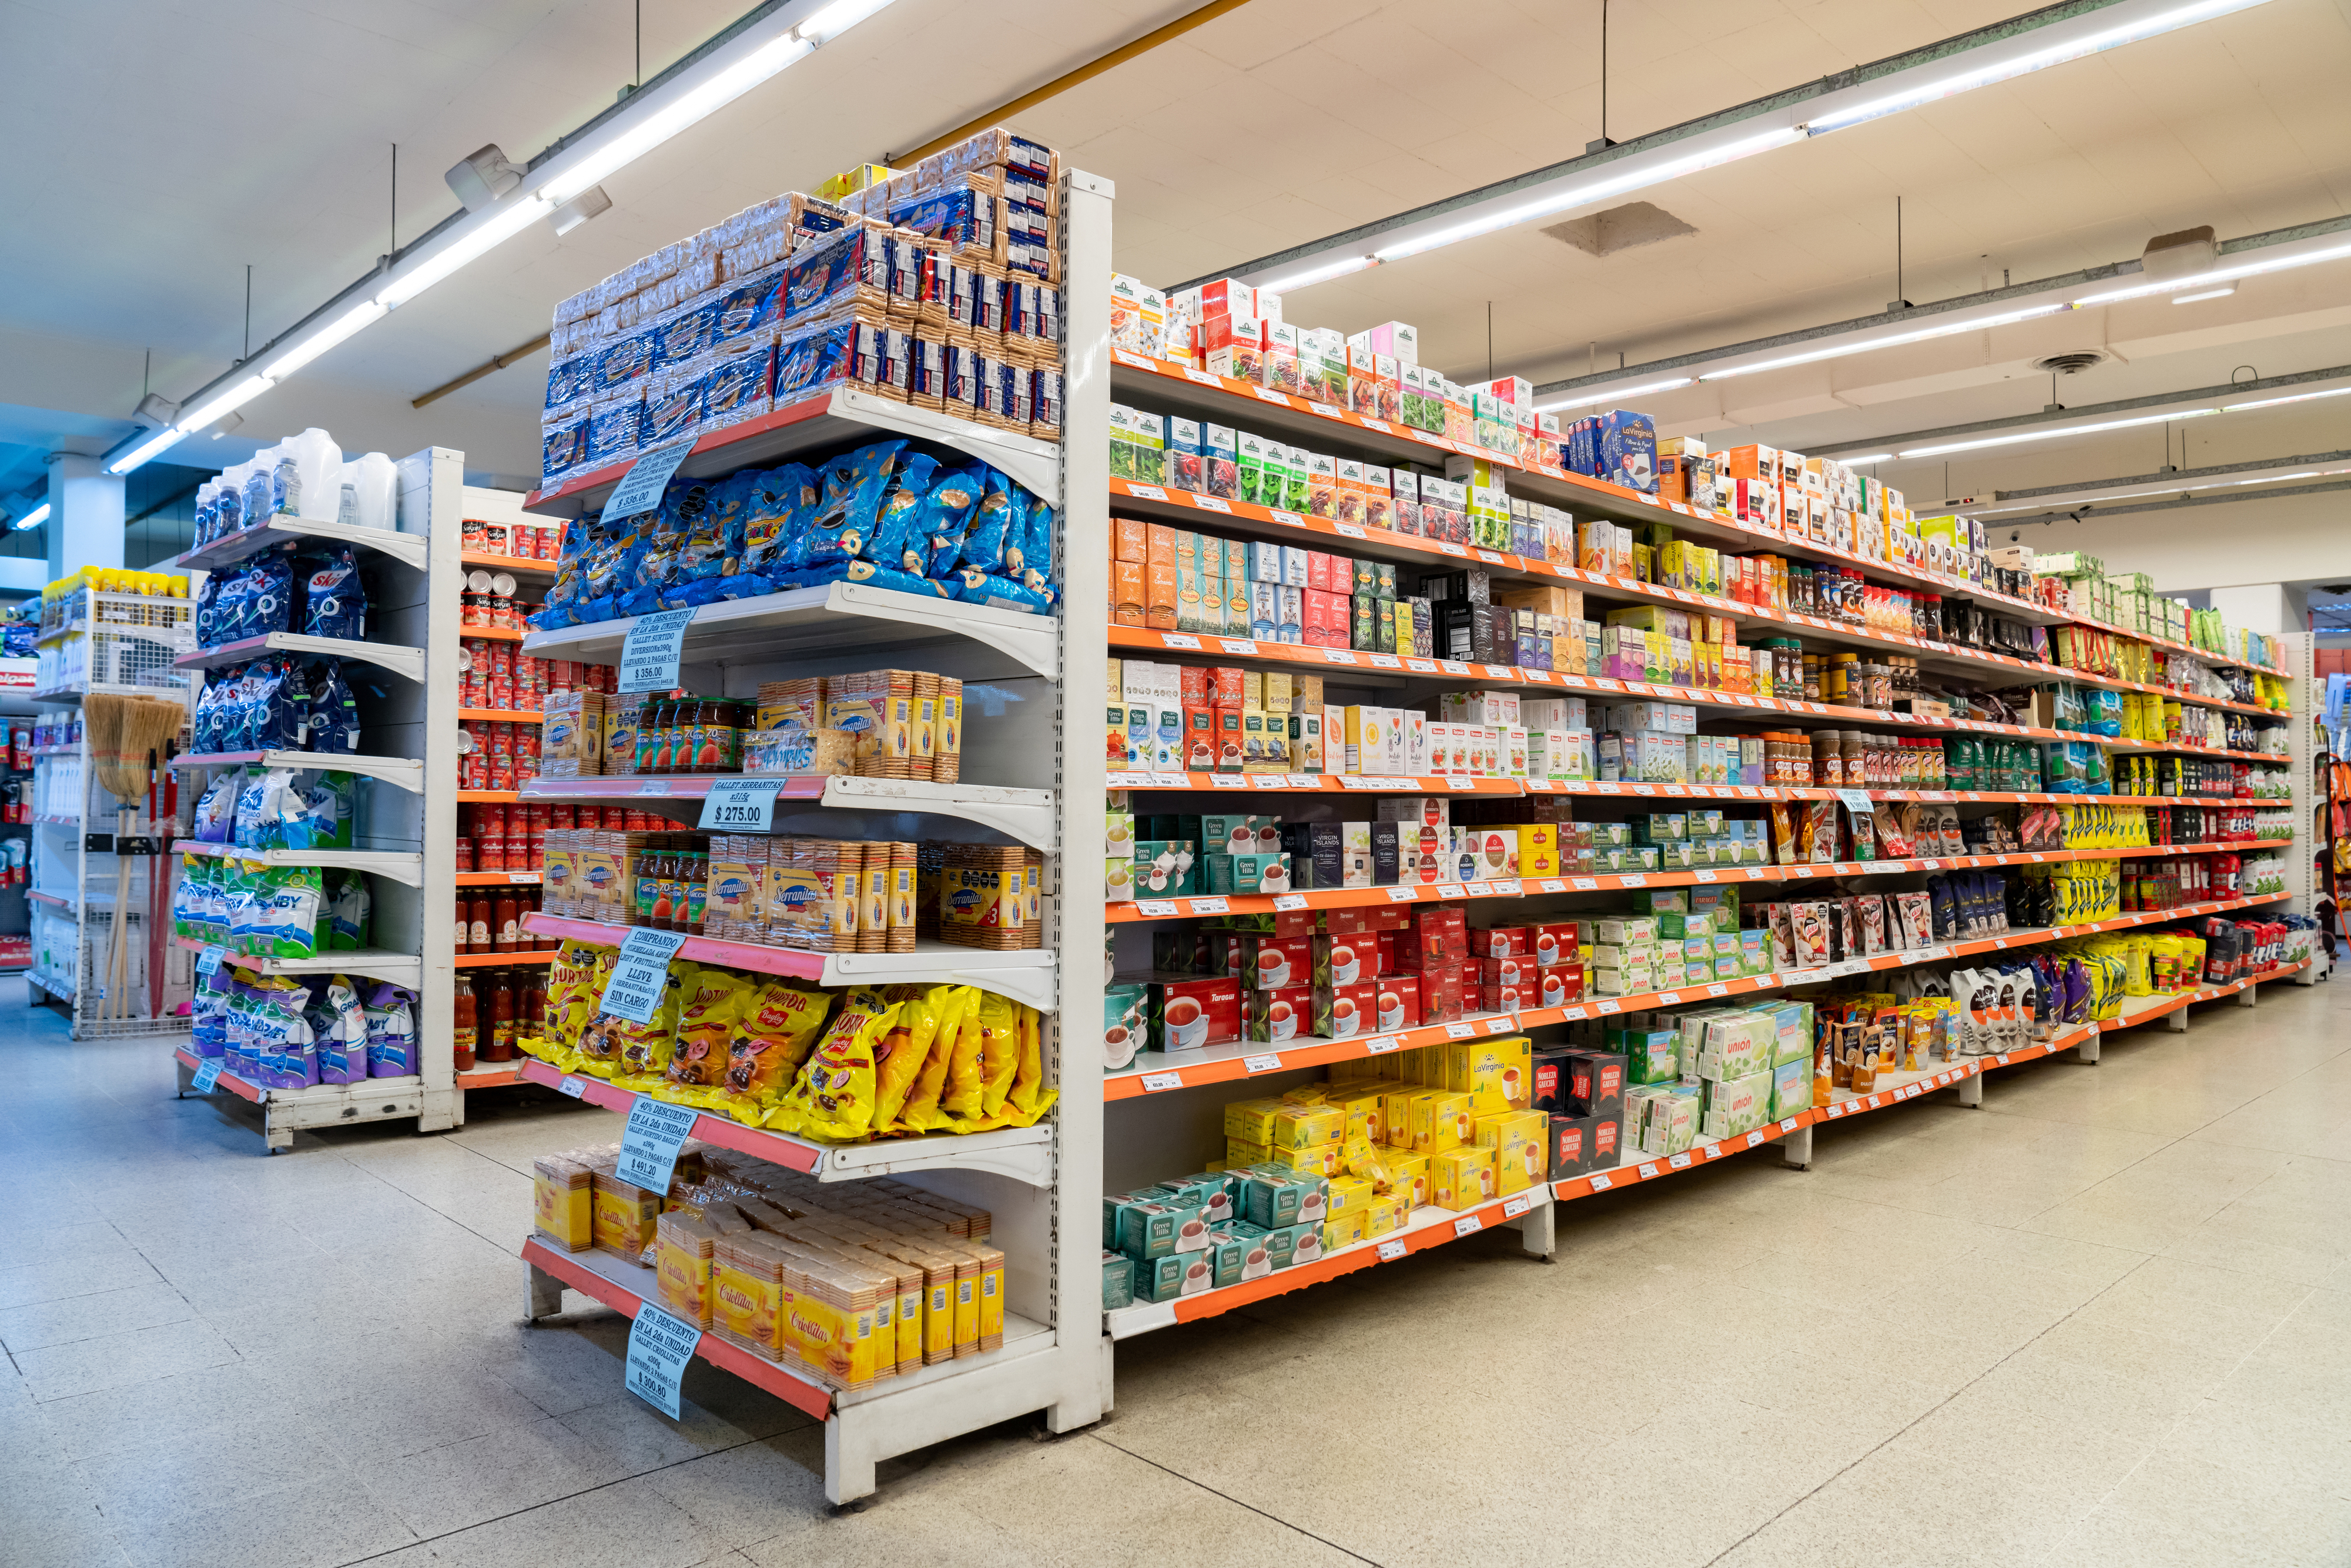 Variety of products on the different aisles and shelfs at the supermarket